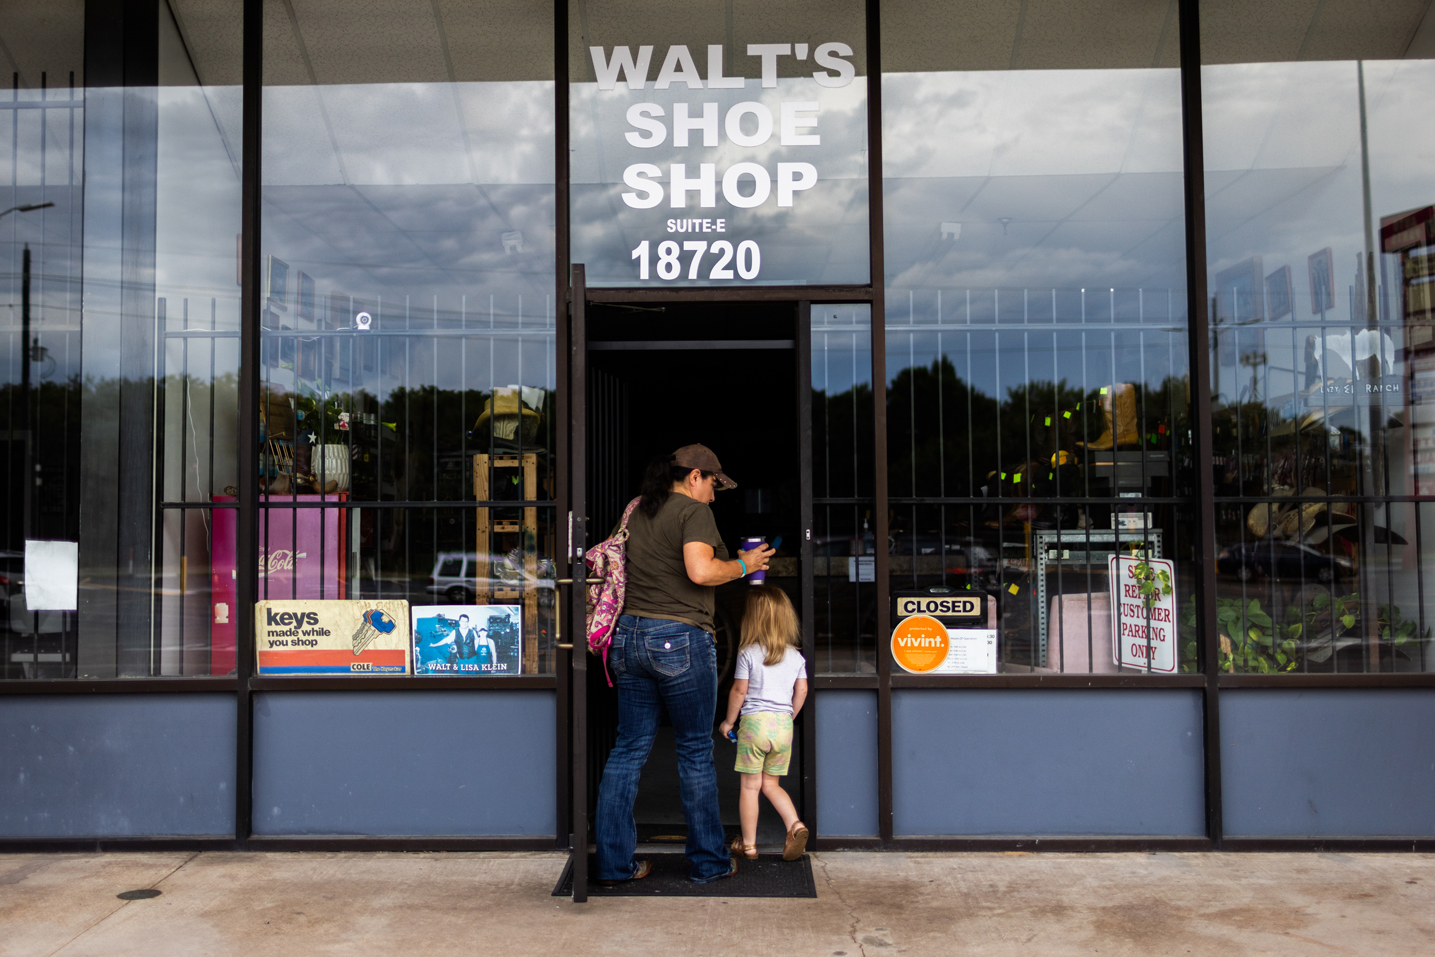 Lisa Klein opens up Walter’s Shoe Shop early morning in Willowbrook. Klein runs the shoe shop that was founded by her late husband Walter Klein in 1994, before he was arrested and suffered a heart attack at the Harris County Jail.